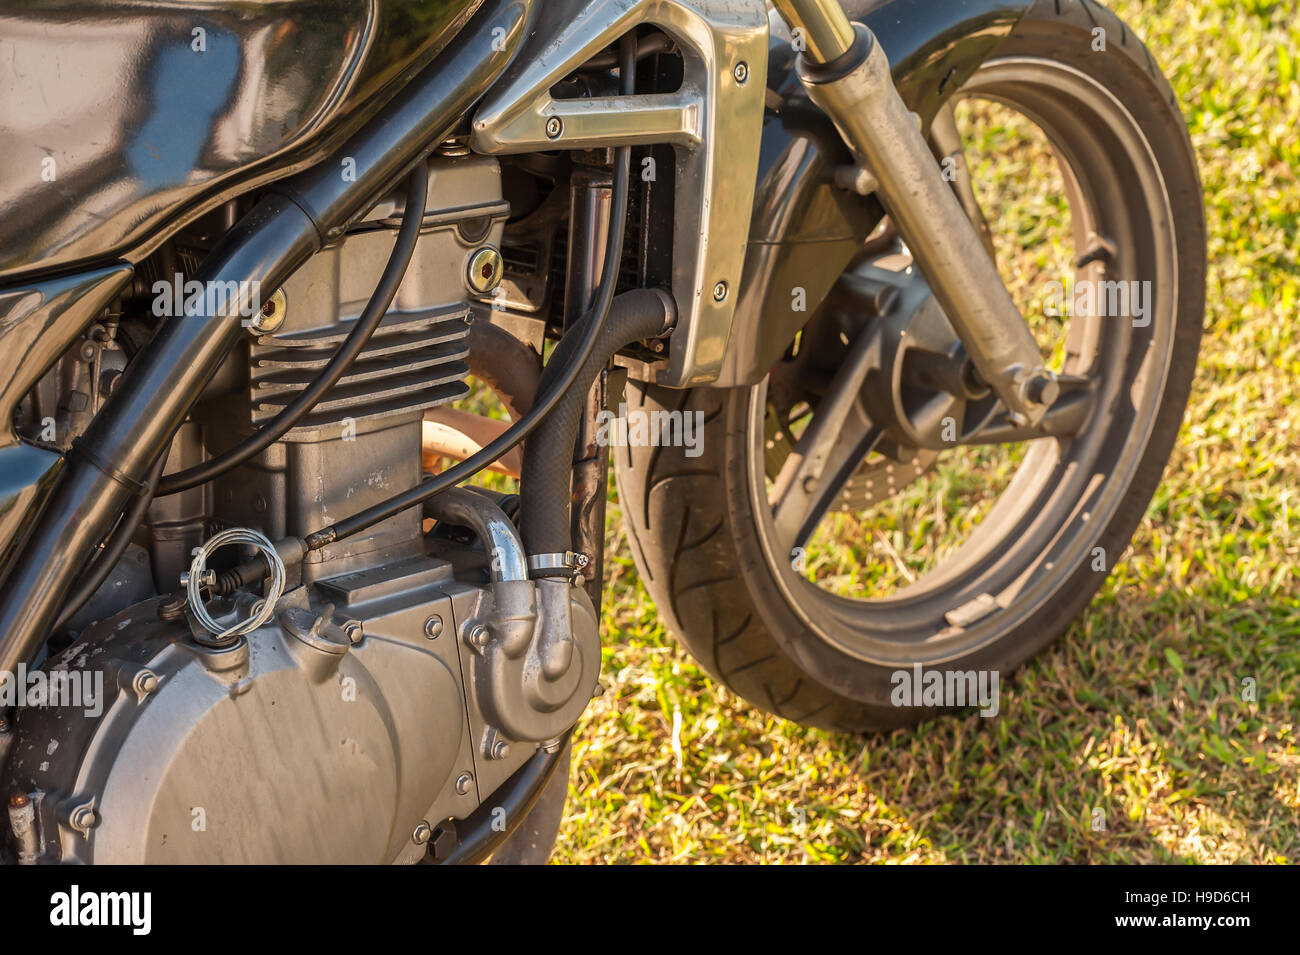 Close up view of a old motorcycle engine. Stock Photo